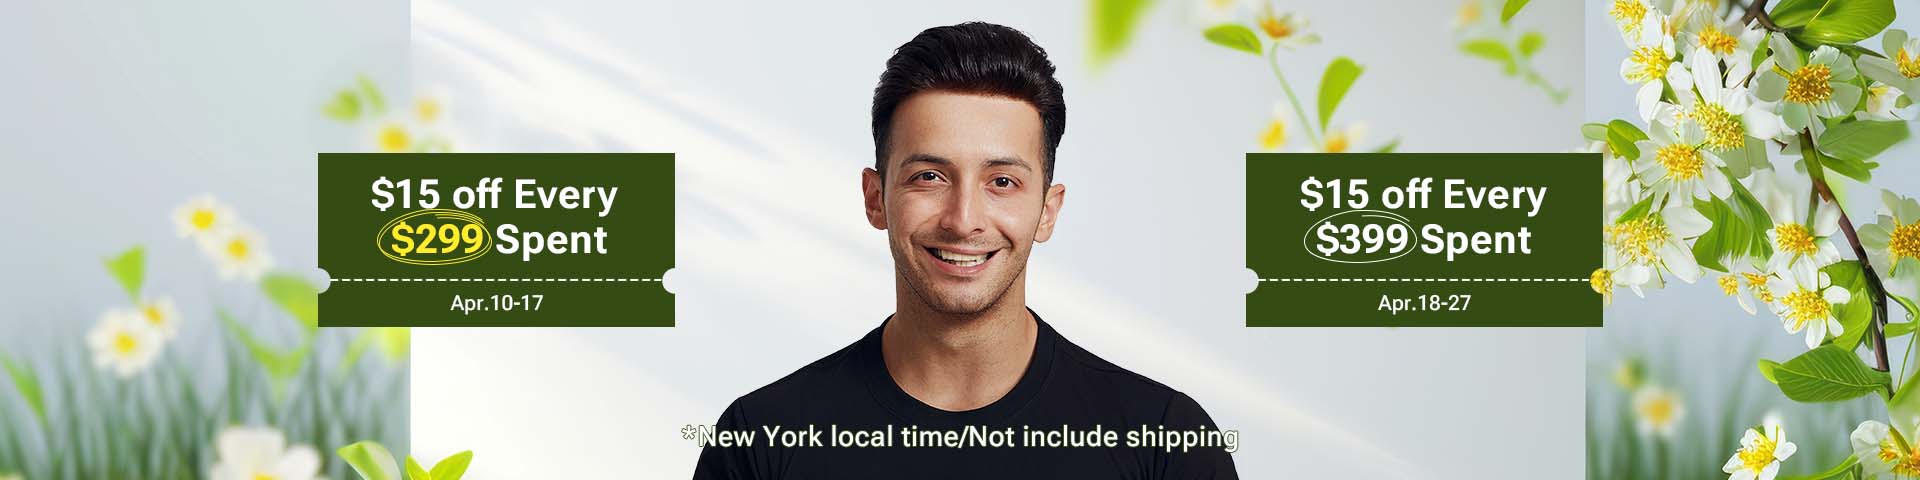 Newtimes Hair banner for Spring promotion on Men products page featuring a man wearing a hair system giving a thumbs-up gesture, including discount policies_